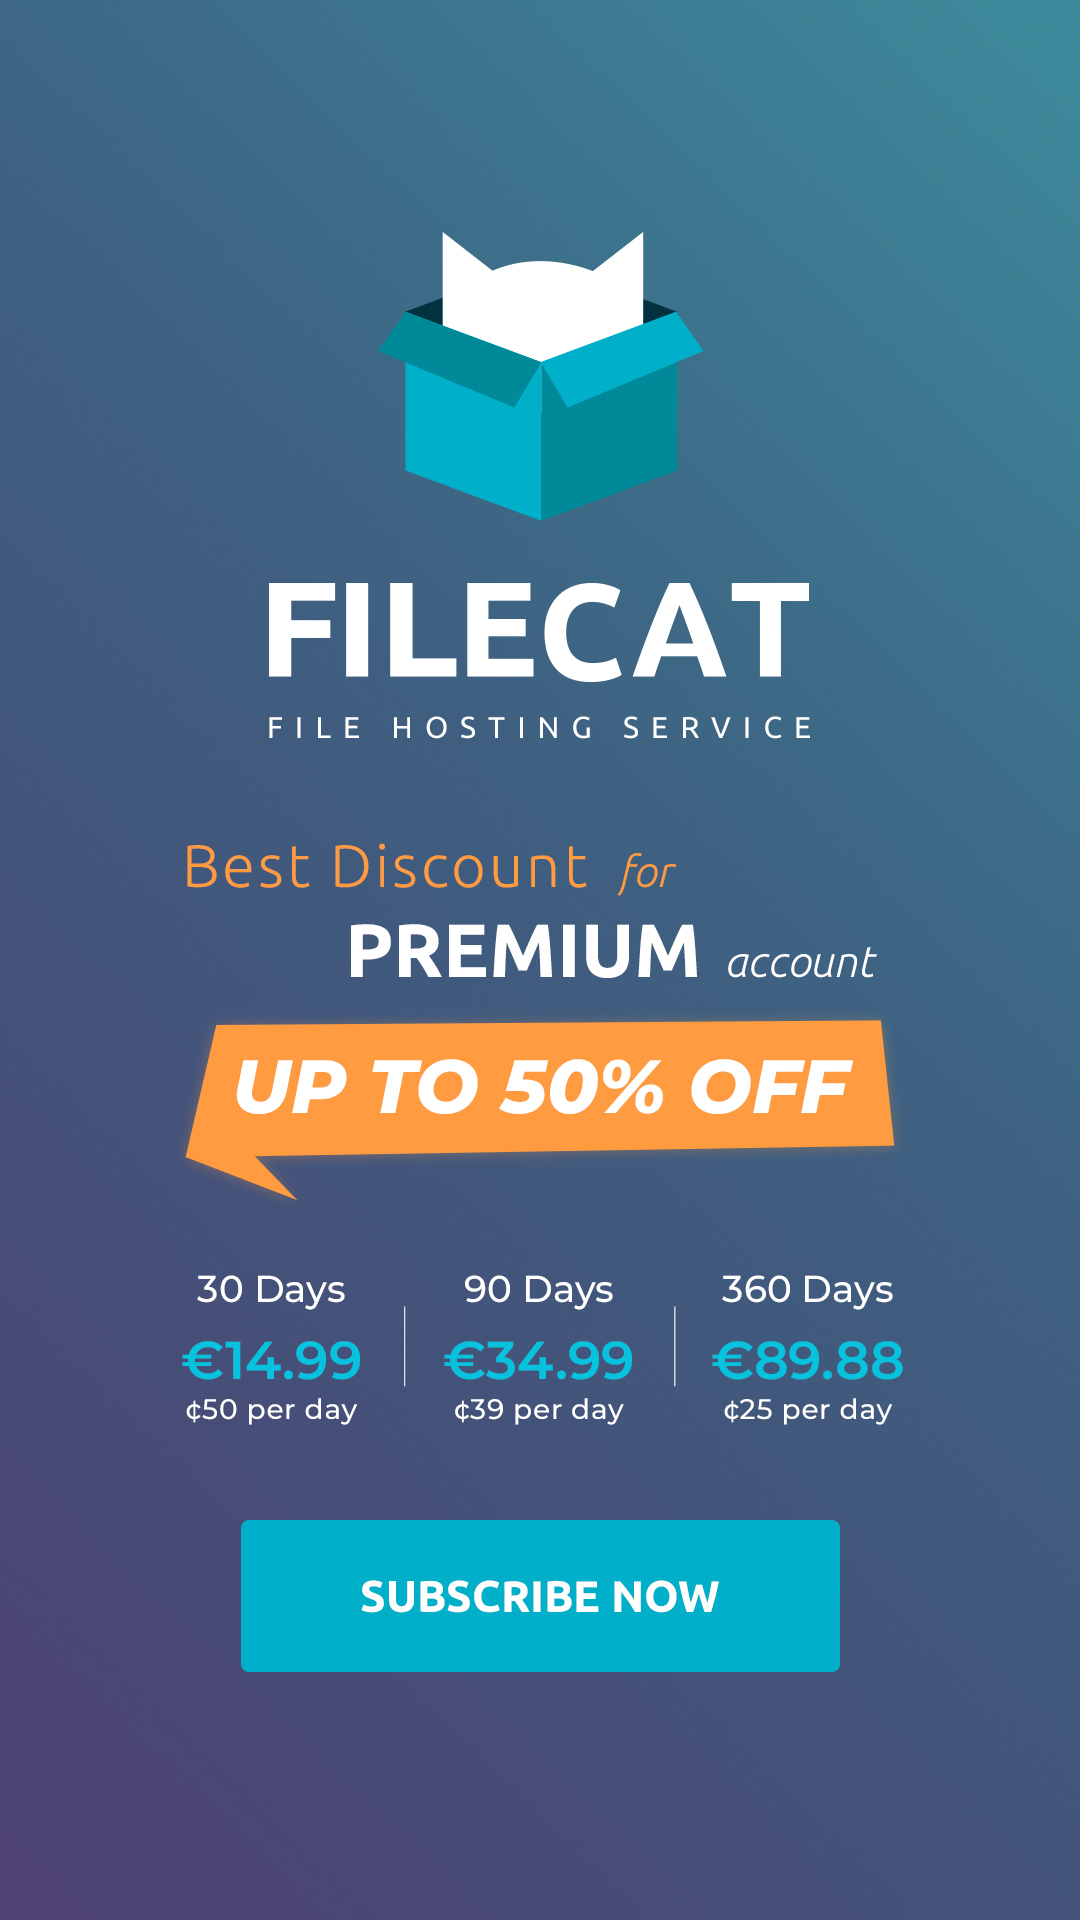 Become Premium NOW and Save Up To 50%!